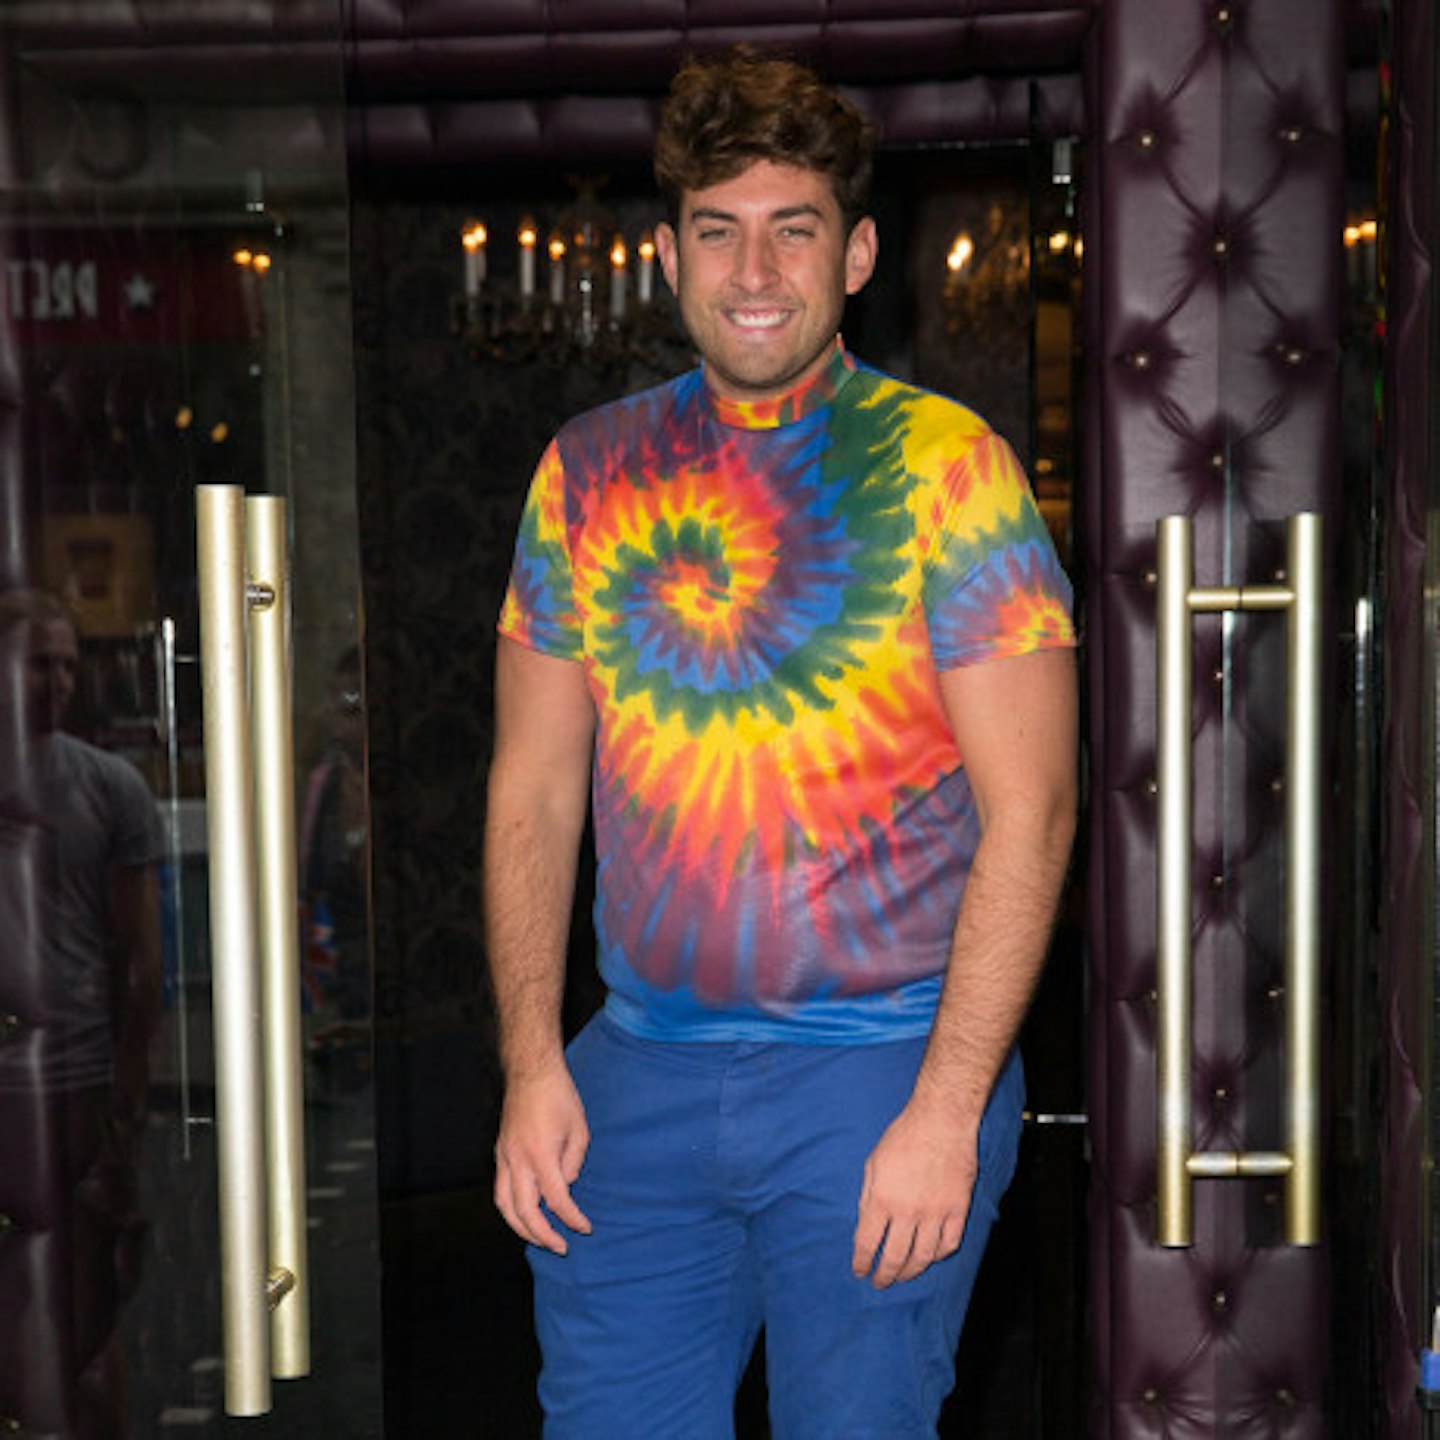 James 'Arg' Argent has been chastised for his partying ways